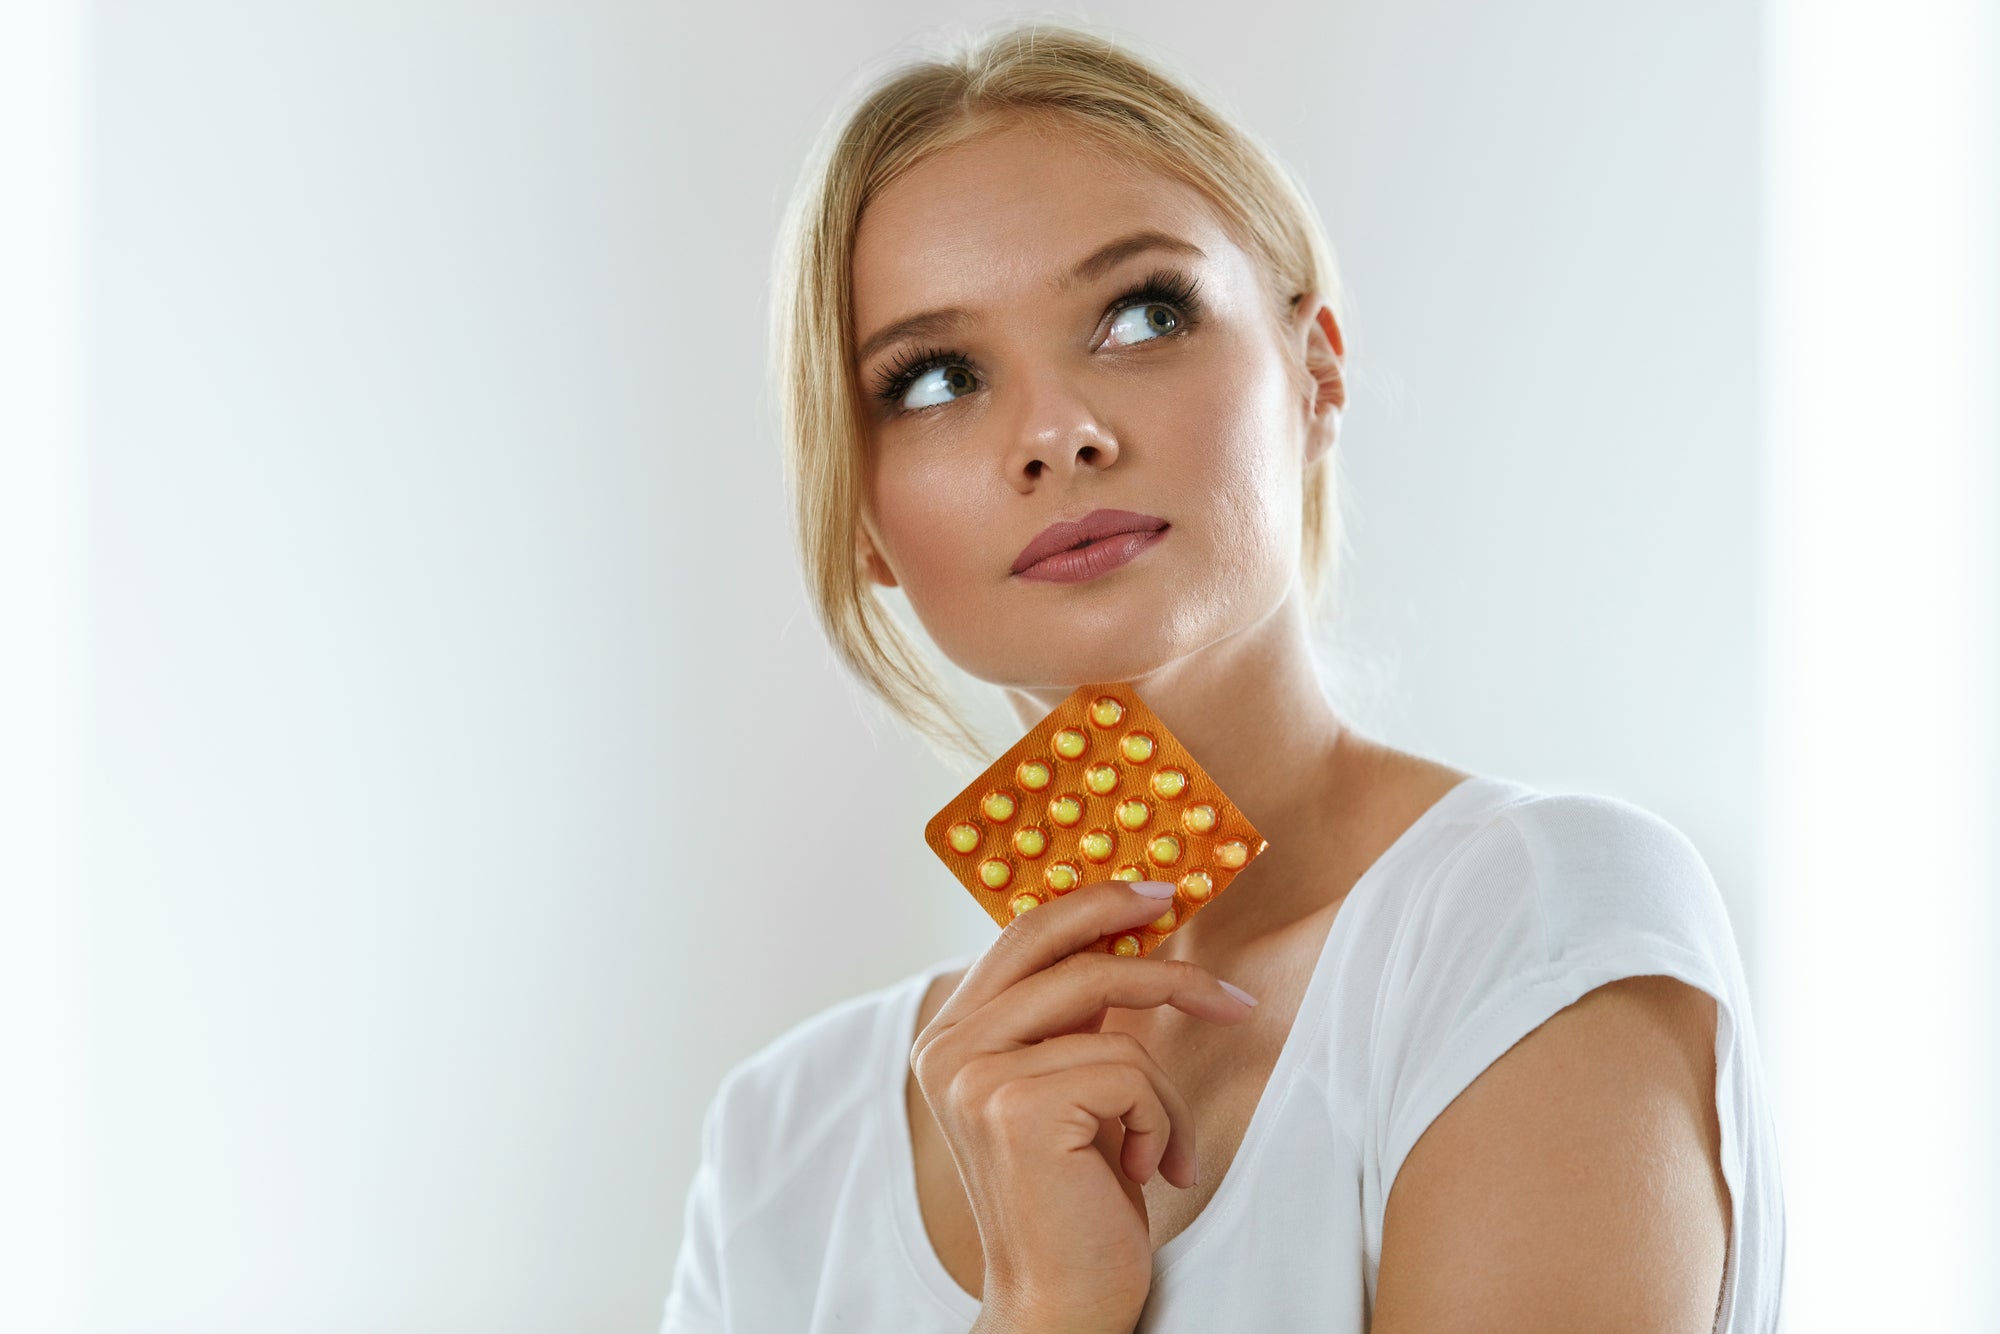 4 Tips To Improve Fertility When Coming Off the Contraceptive Pill